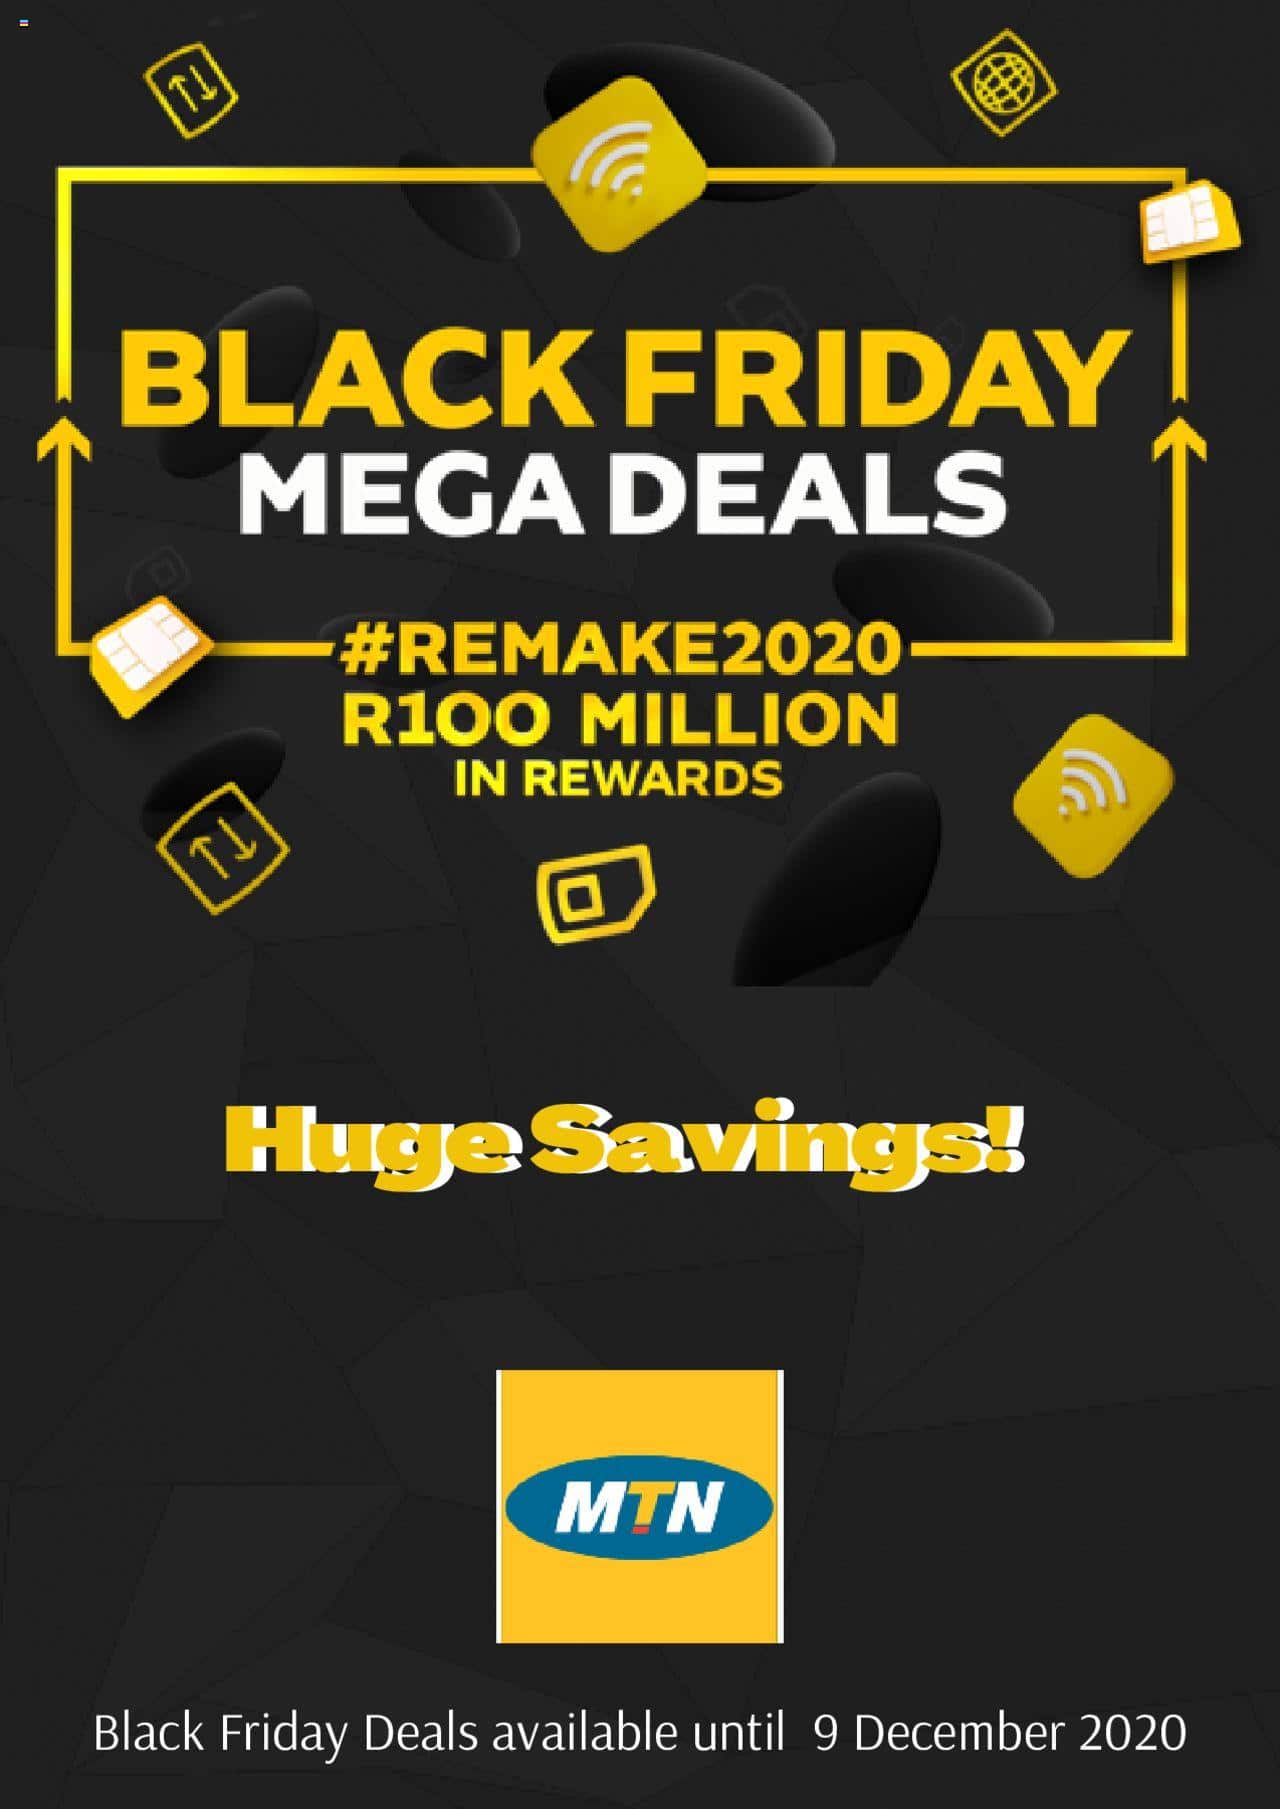 MTN Black Friday Deals & Specials 2021 - What Is Great Clips Black Friday Deal